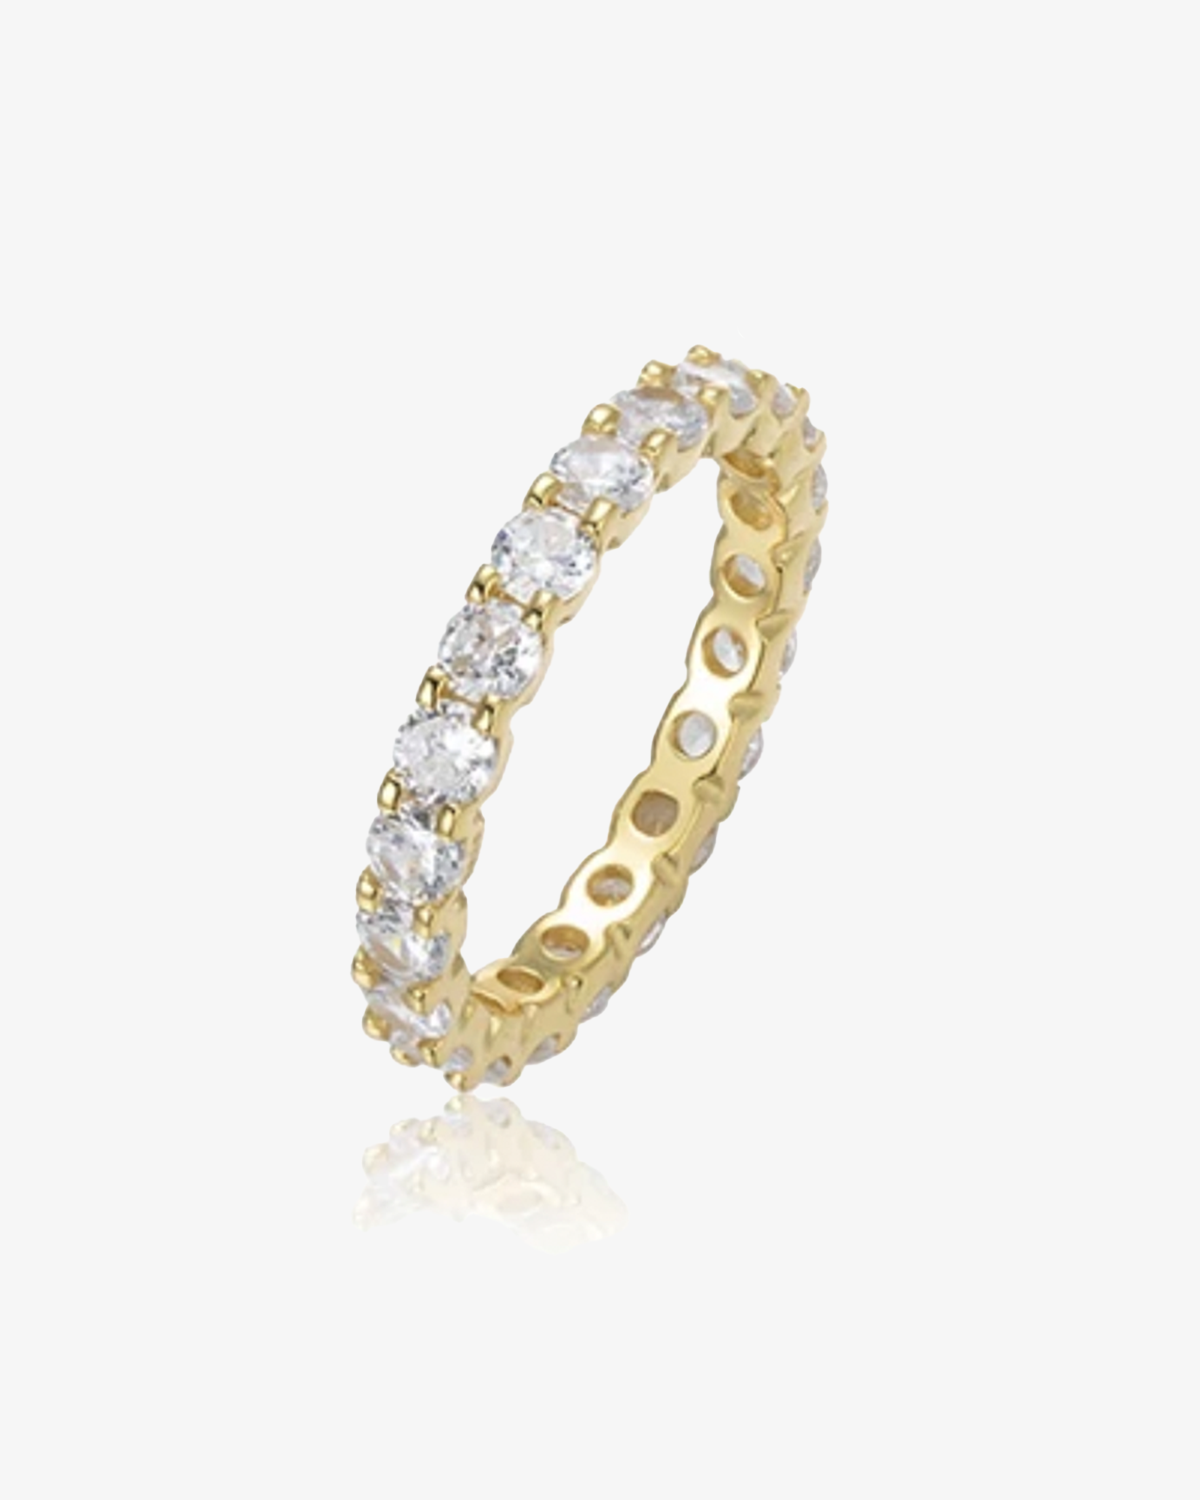 Claire Eternity Band Ring